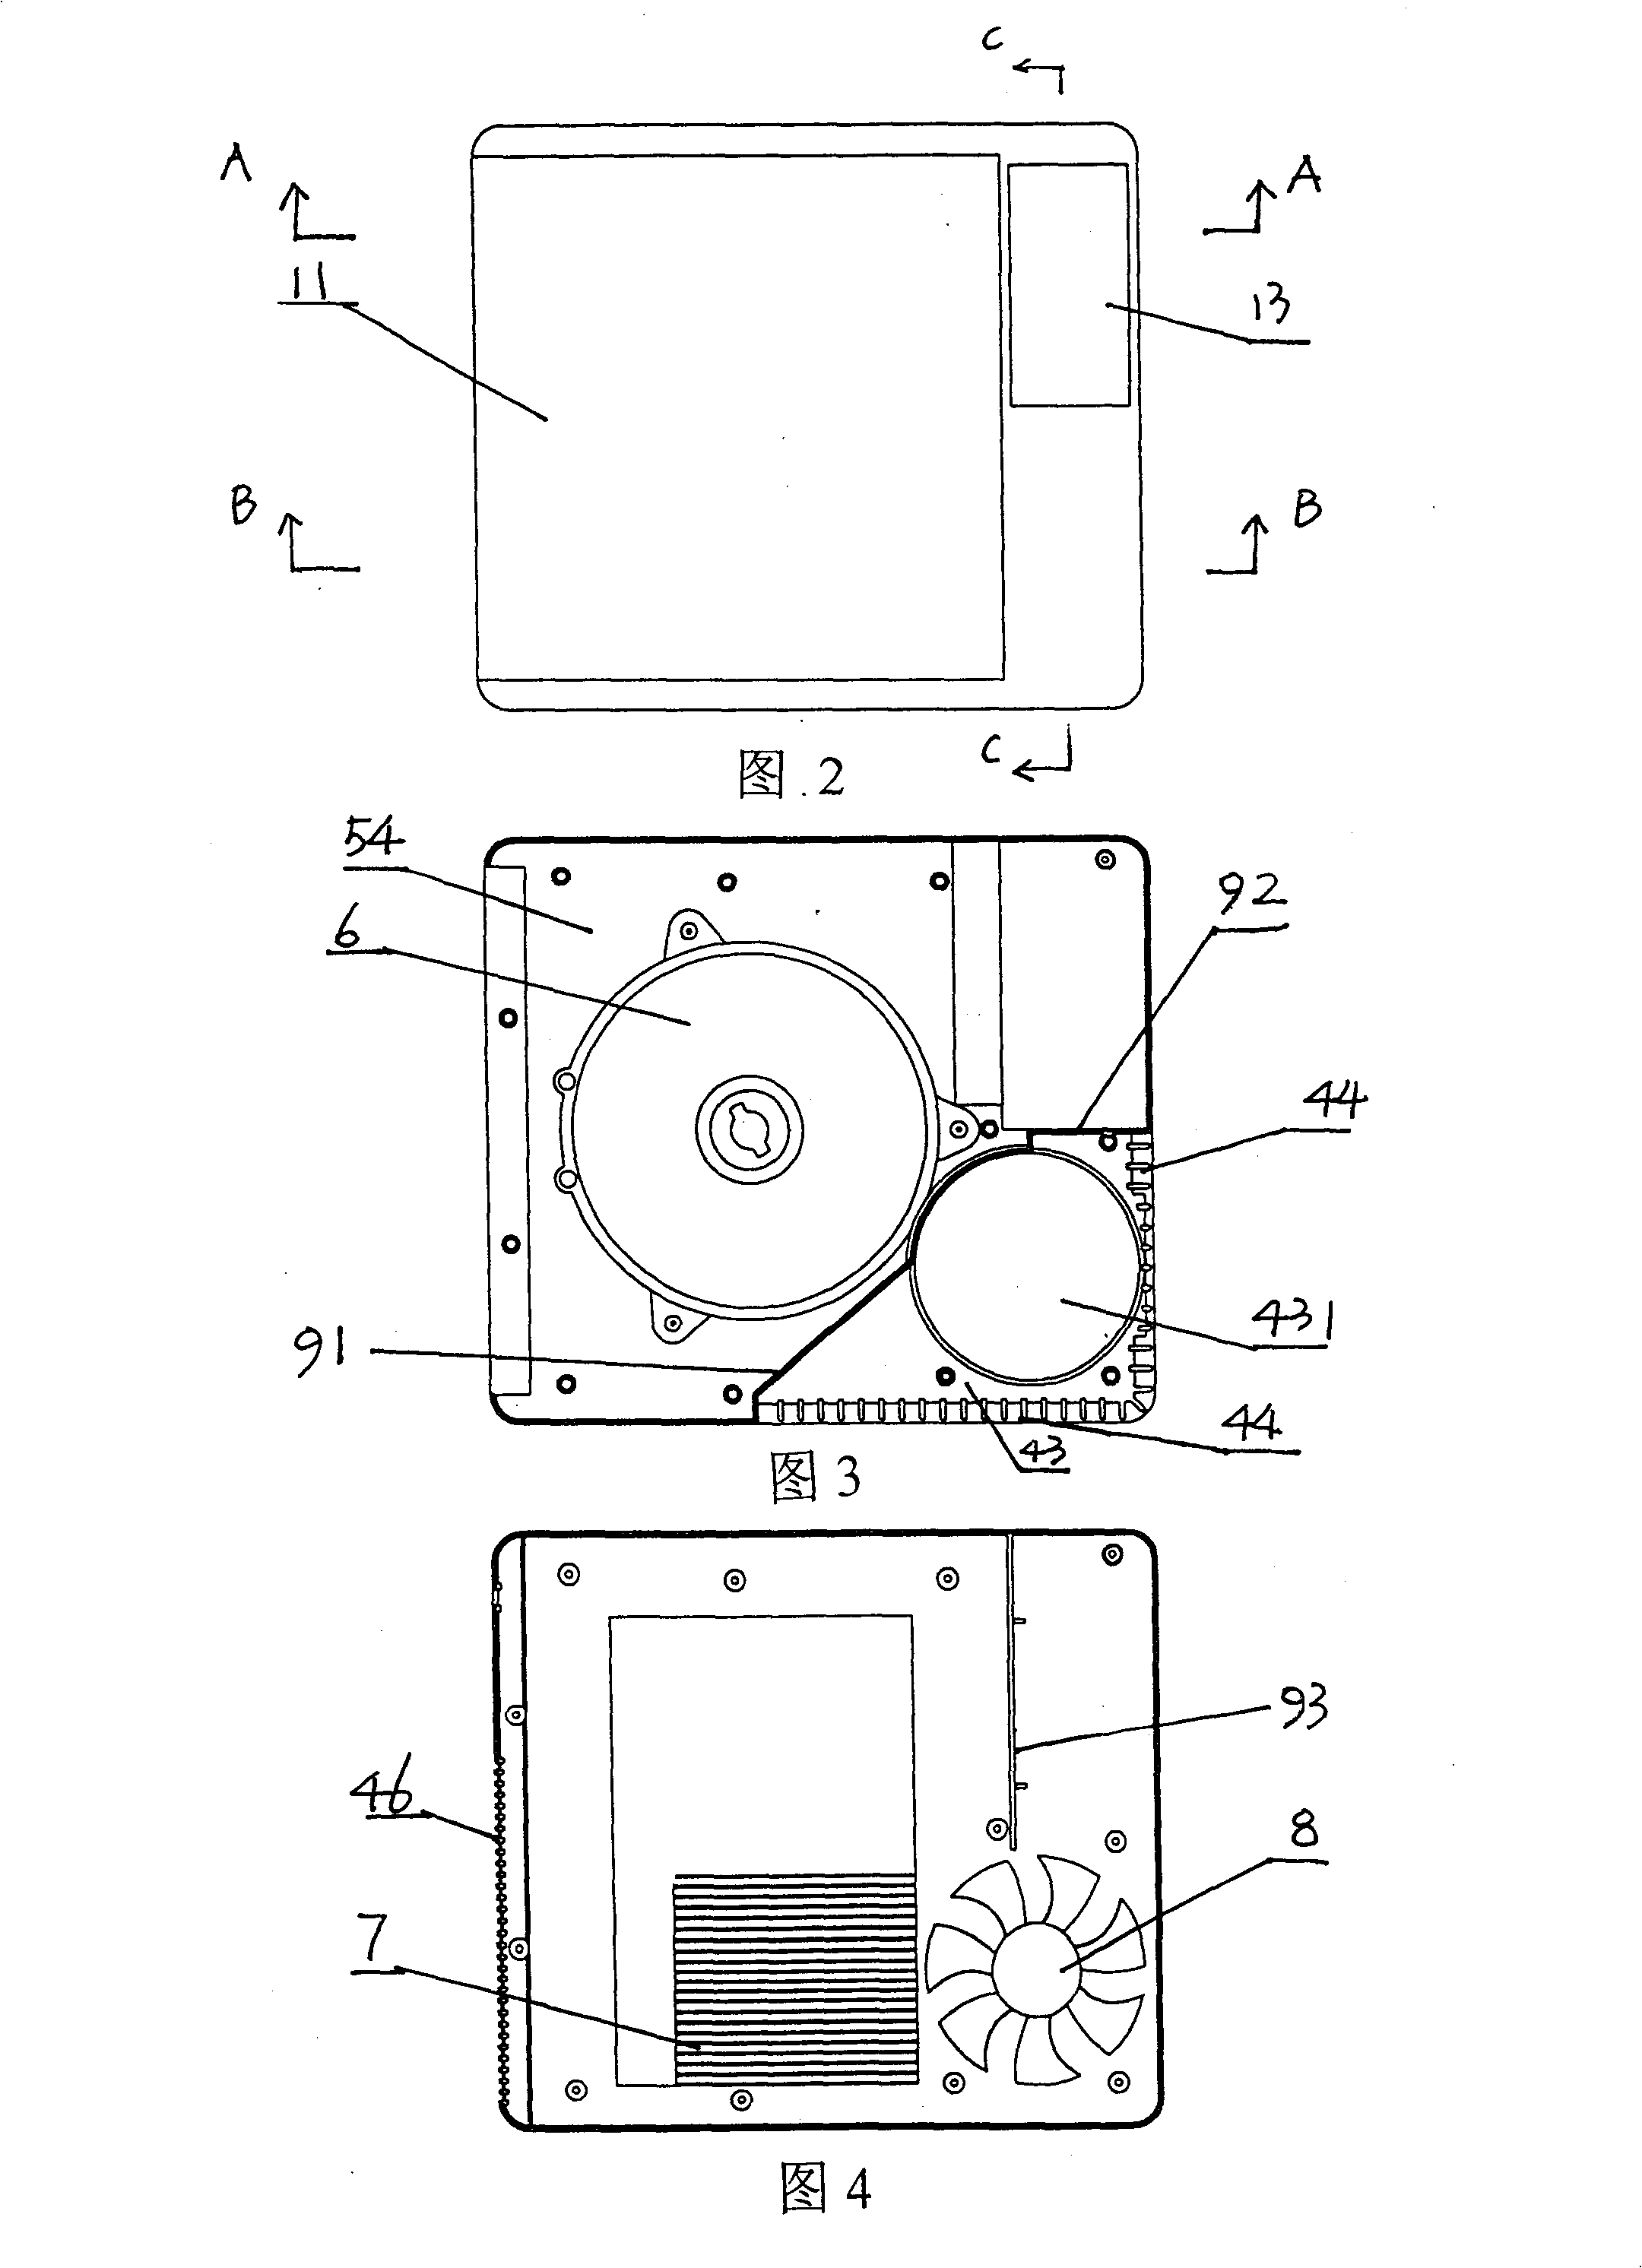 Electromagnetic oven